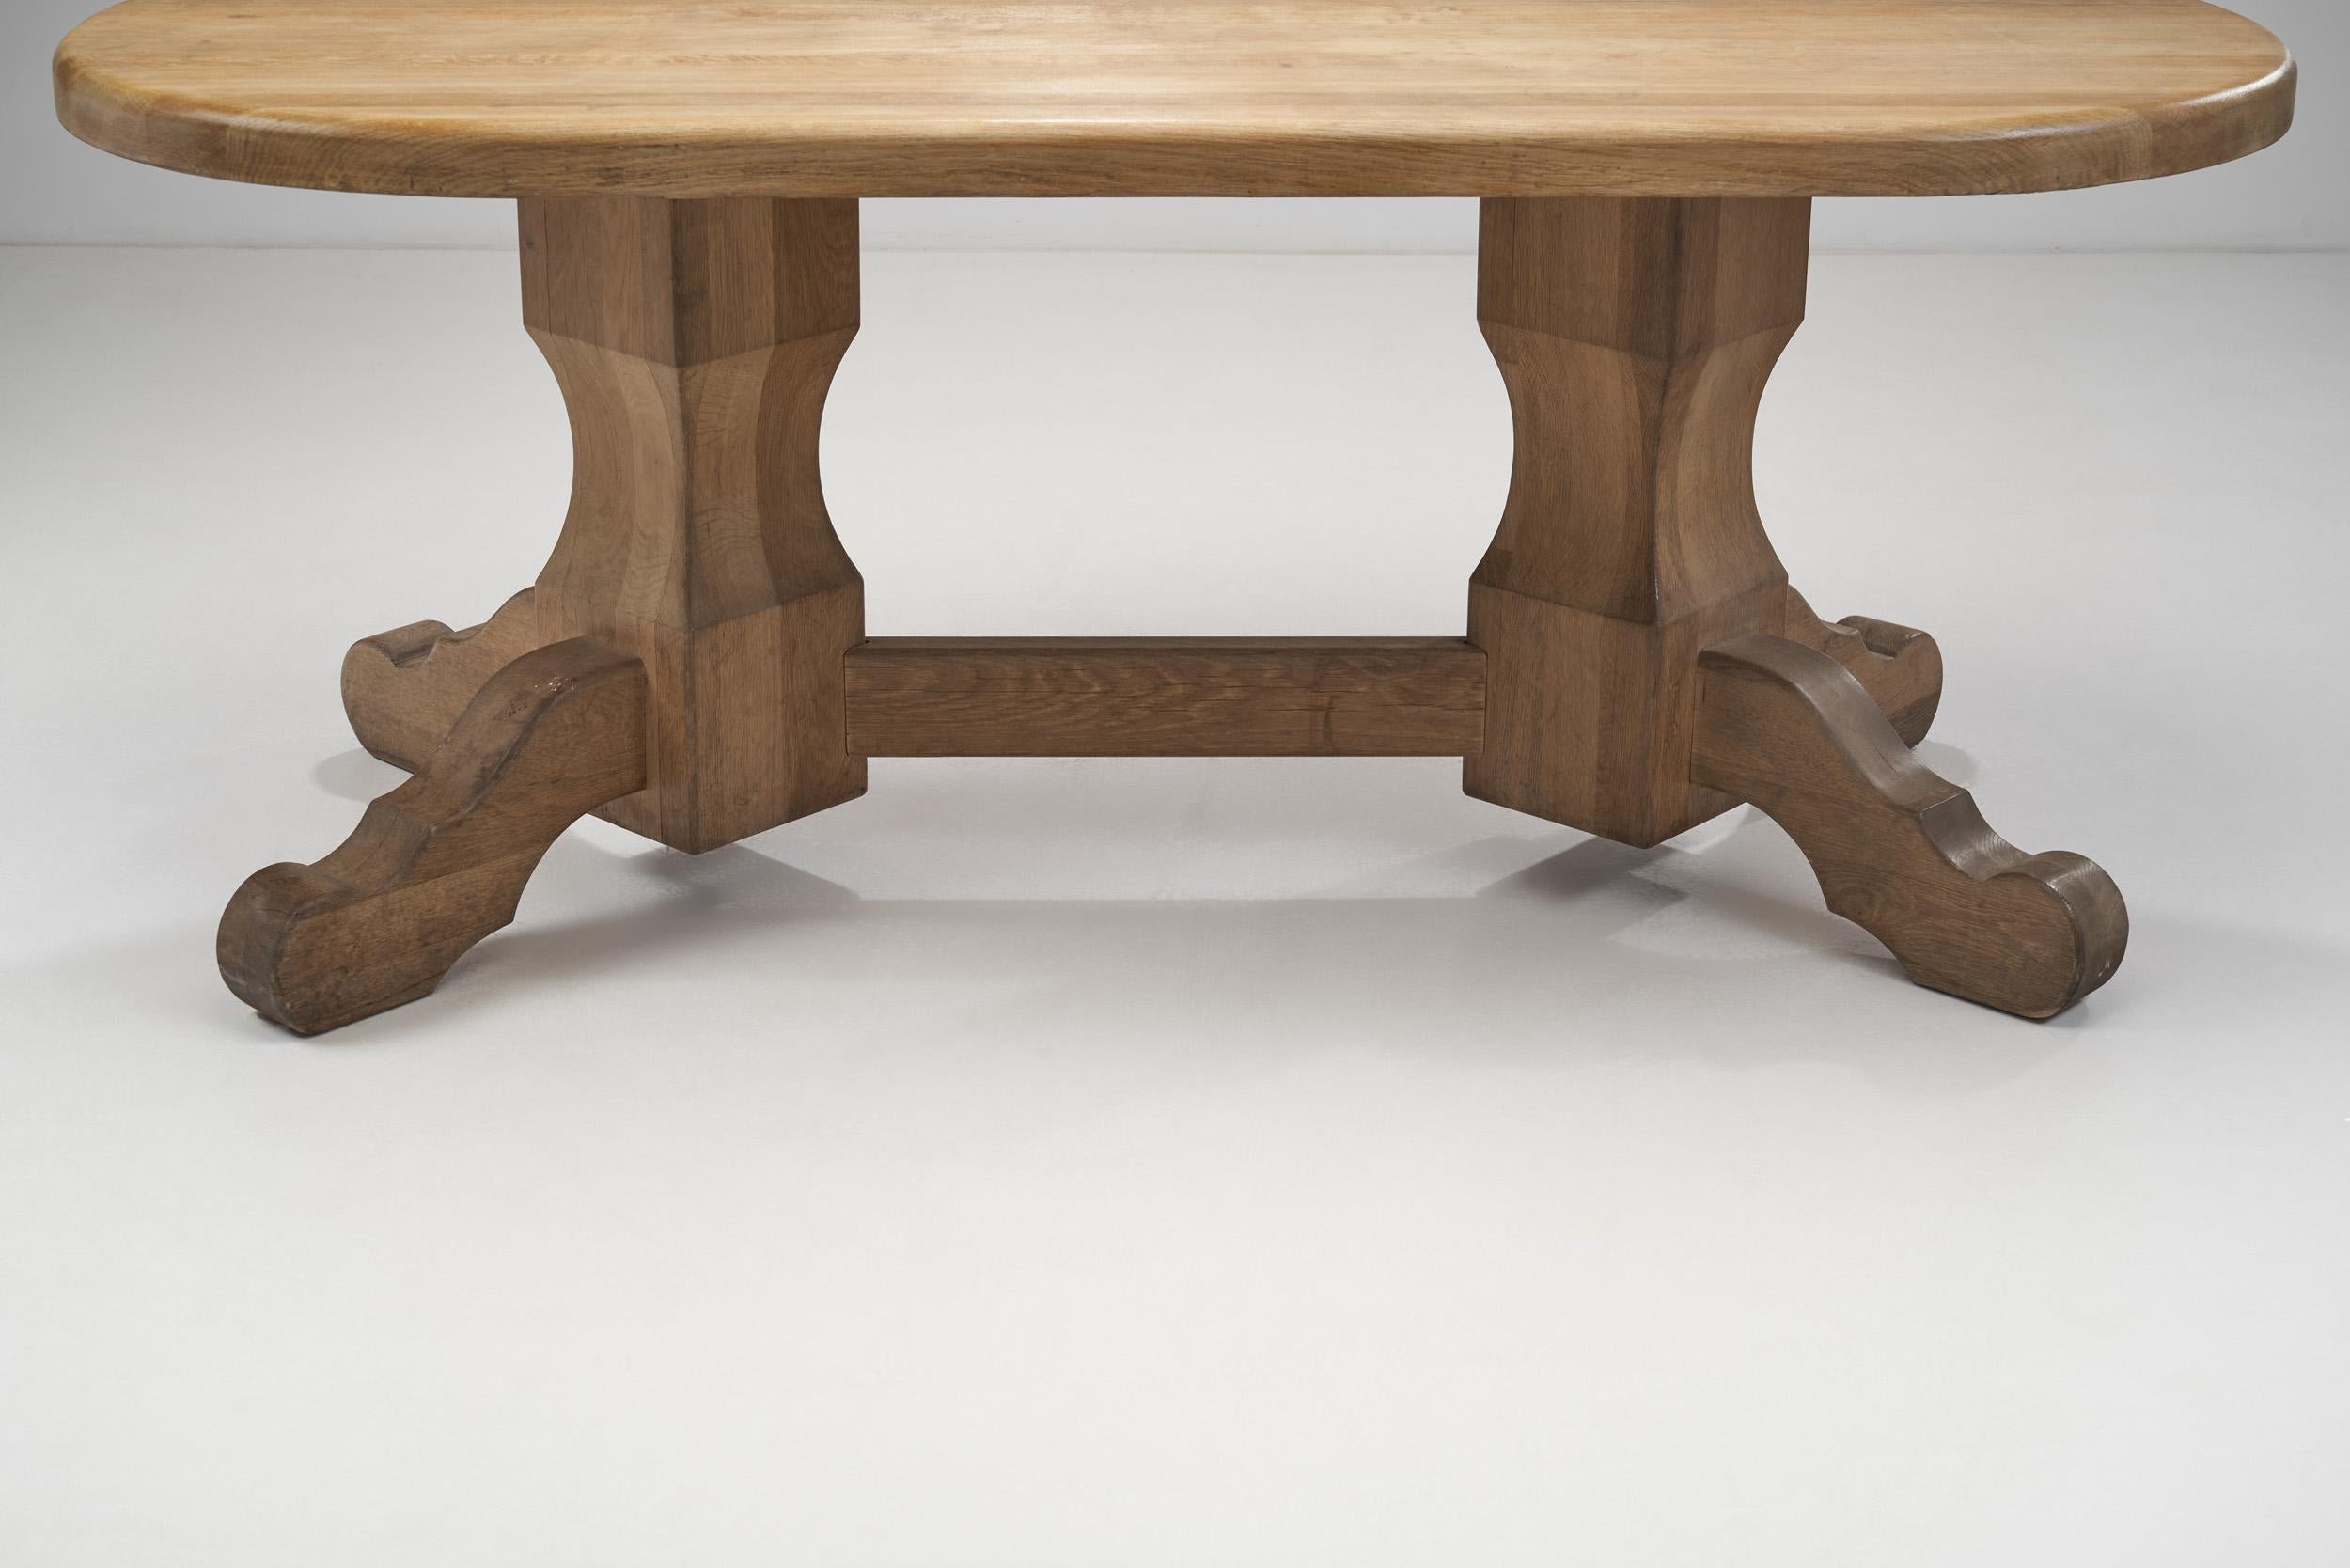 De Puydt Oak Dining Table with Carved Legs, Belgium 1970s For Sale 6